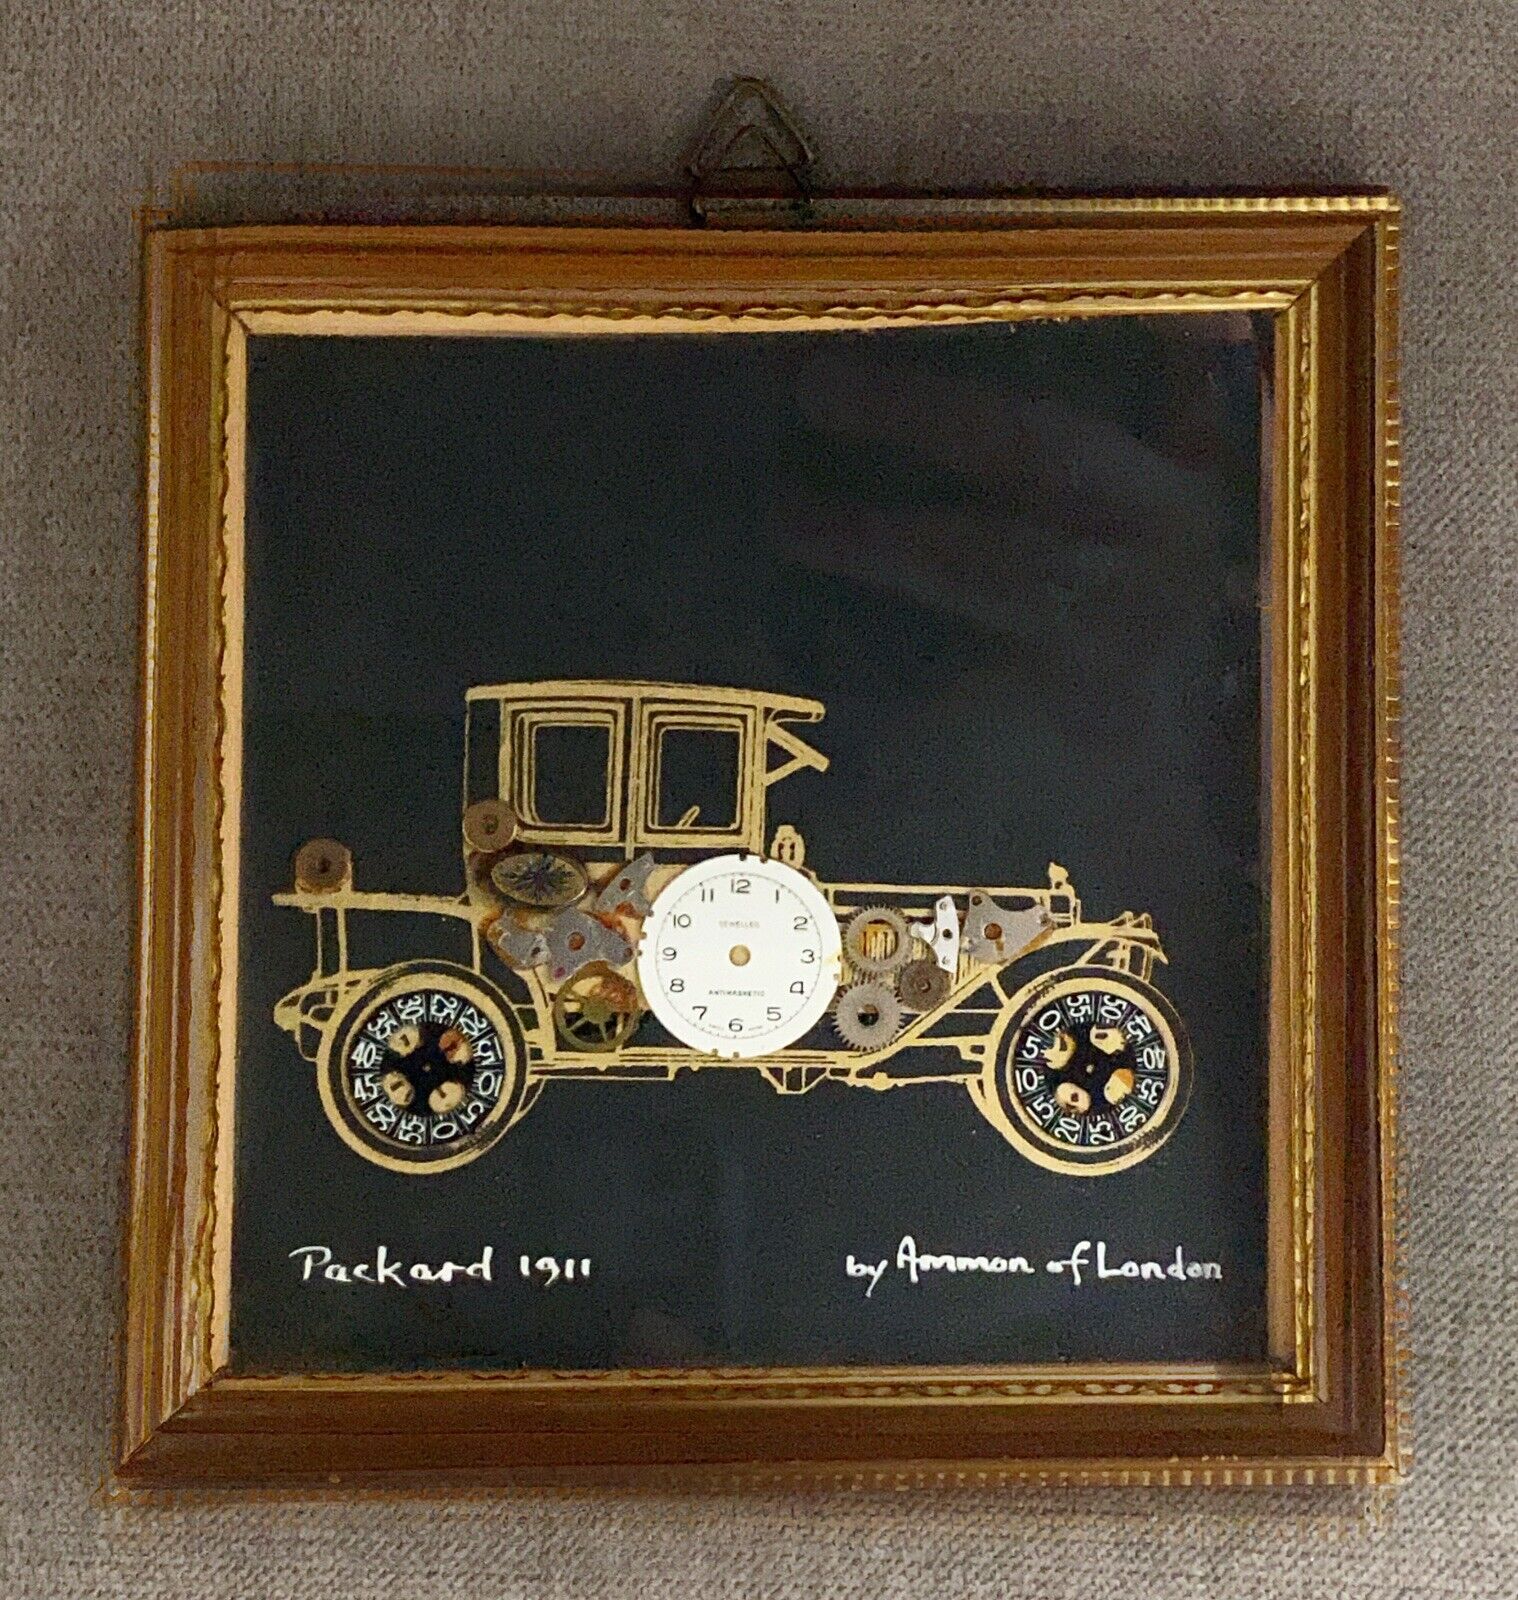 Ammon of London Shadow Box Packard 1911 from watch parts Signed by John Ammon